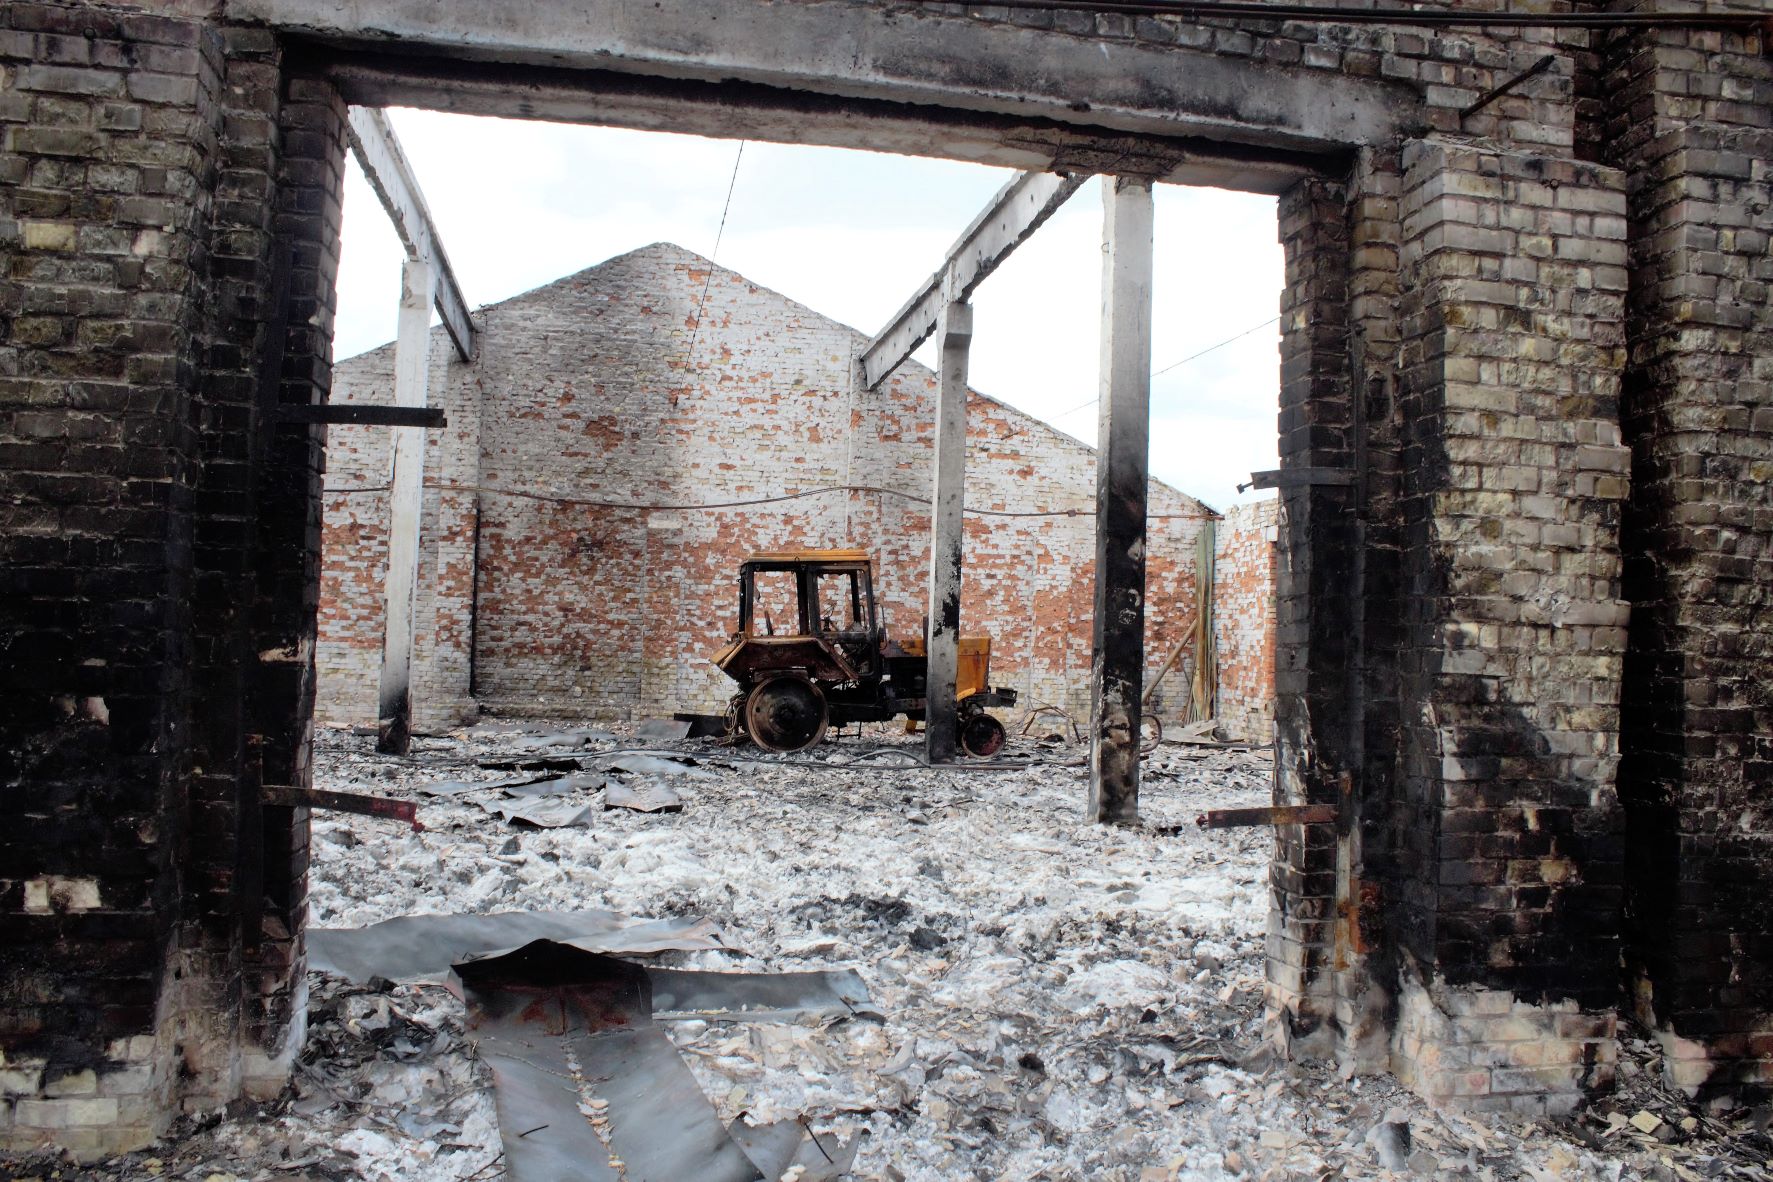  Tractors, barns and silos have seen serious damage in areas with fighting